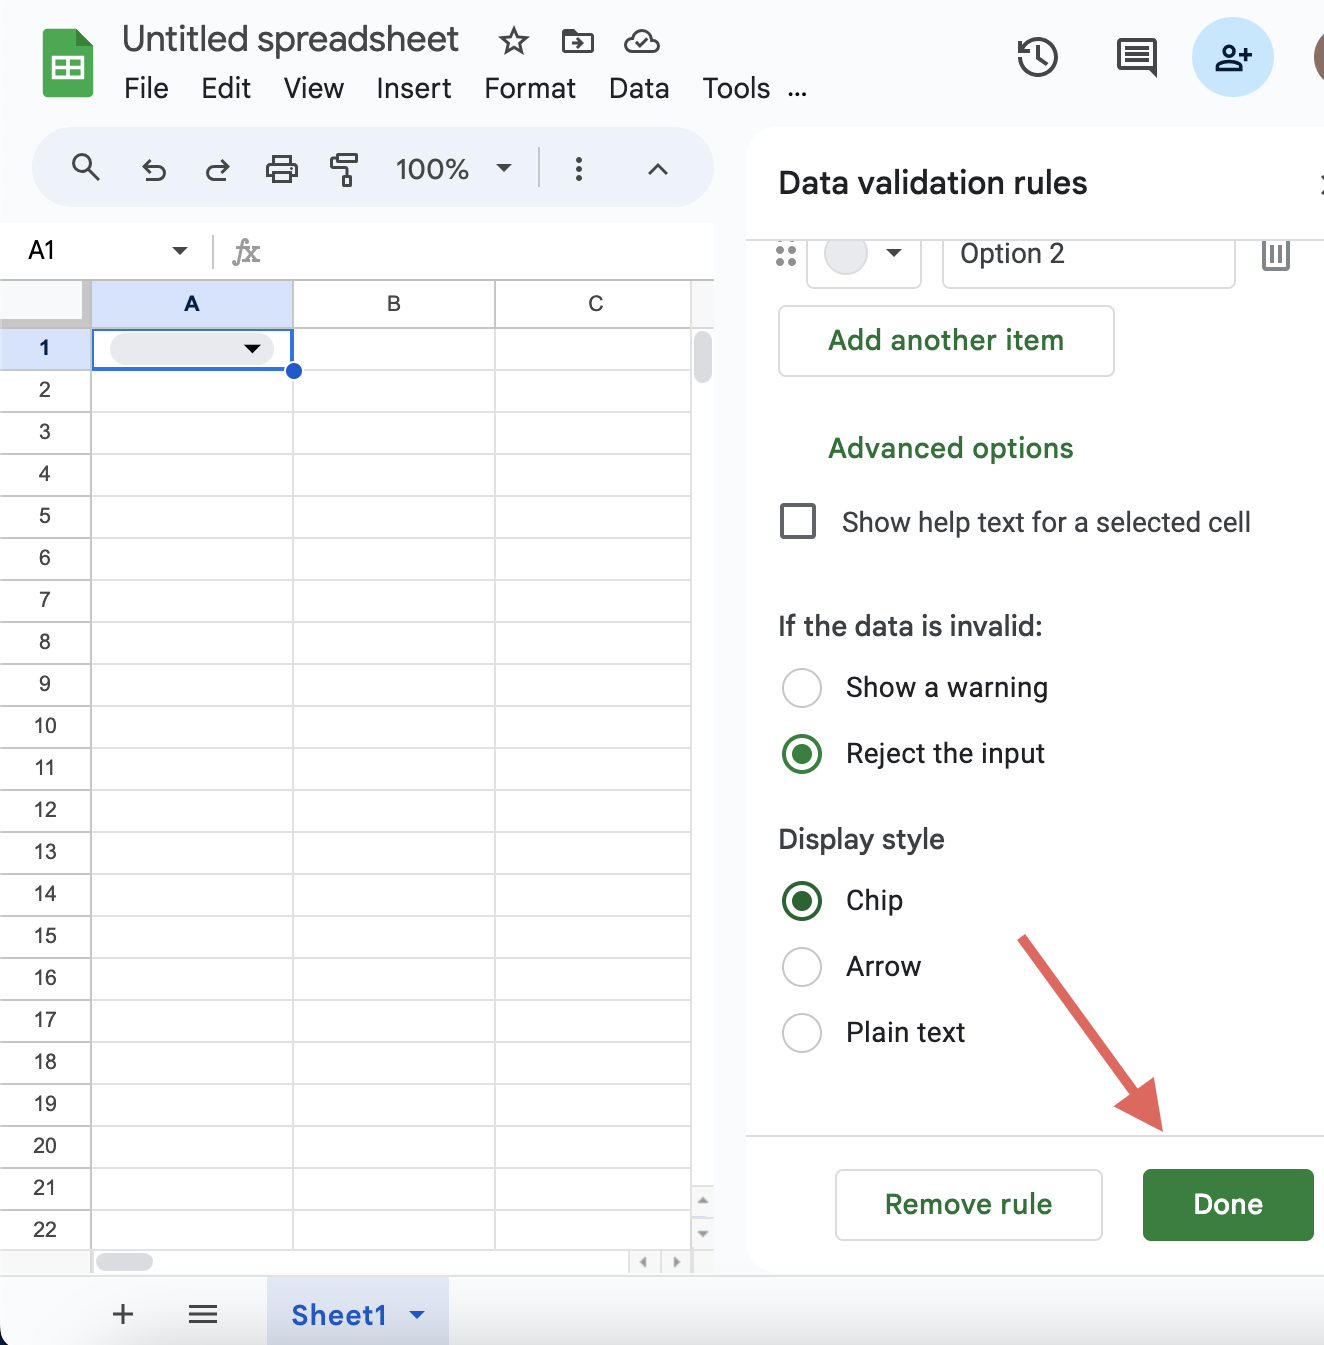 Select done screenshot for the blog article "How to Add a Drop Down List in Google Sheets: A Step-by-Step Guide"